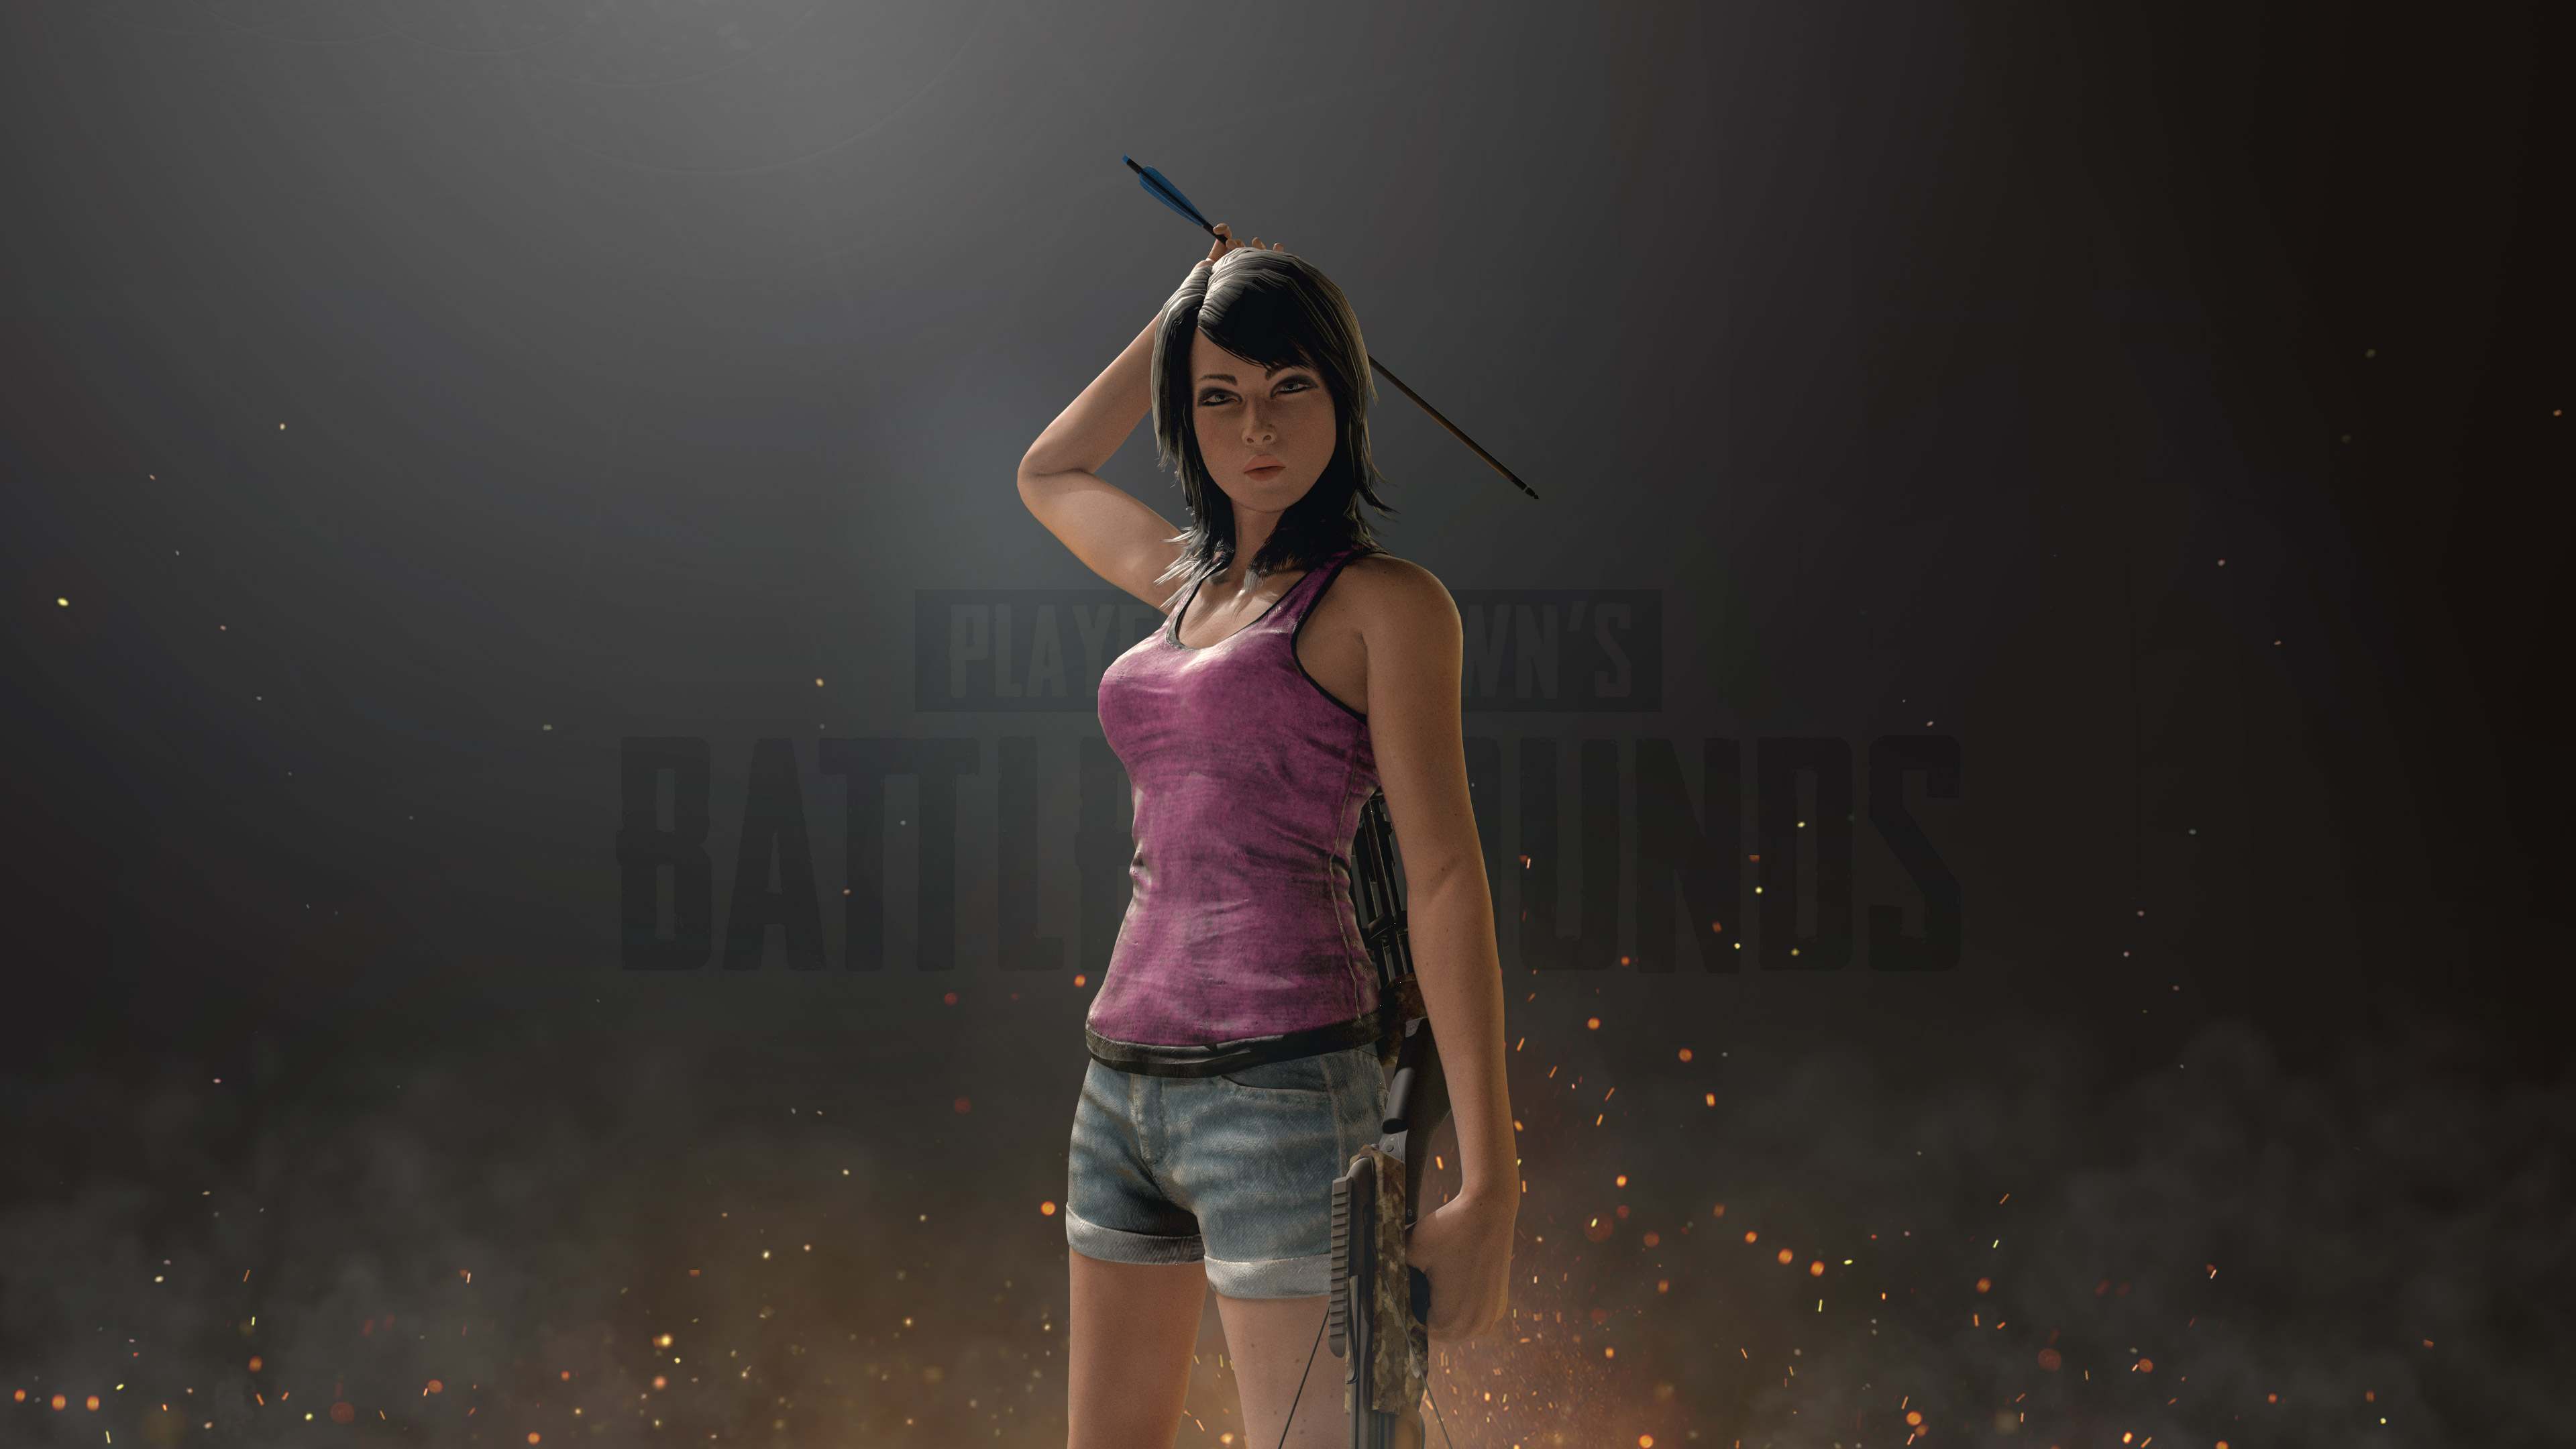  Pubg  Mobile Girl  4k  pubg  wallpapers  playerunknowns 